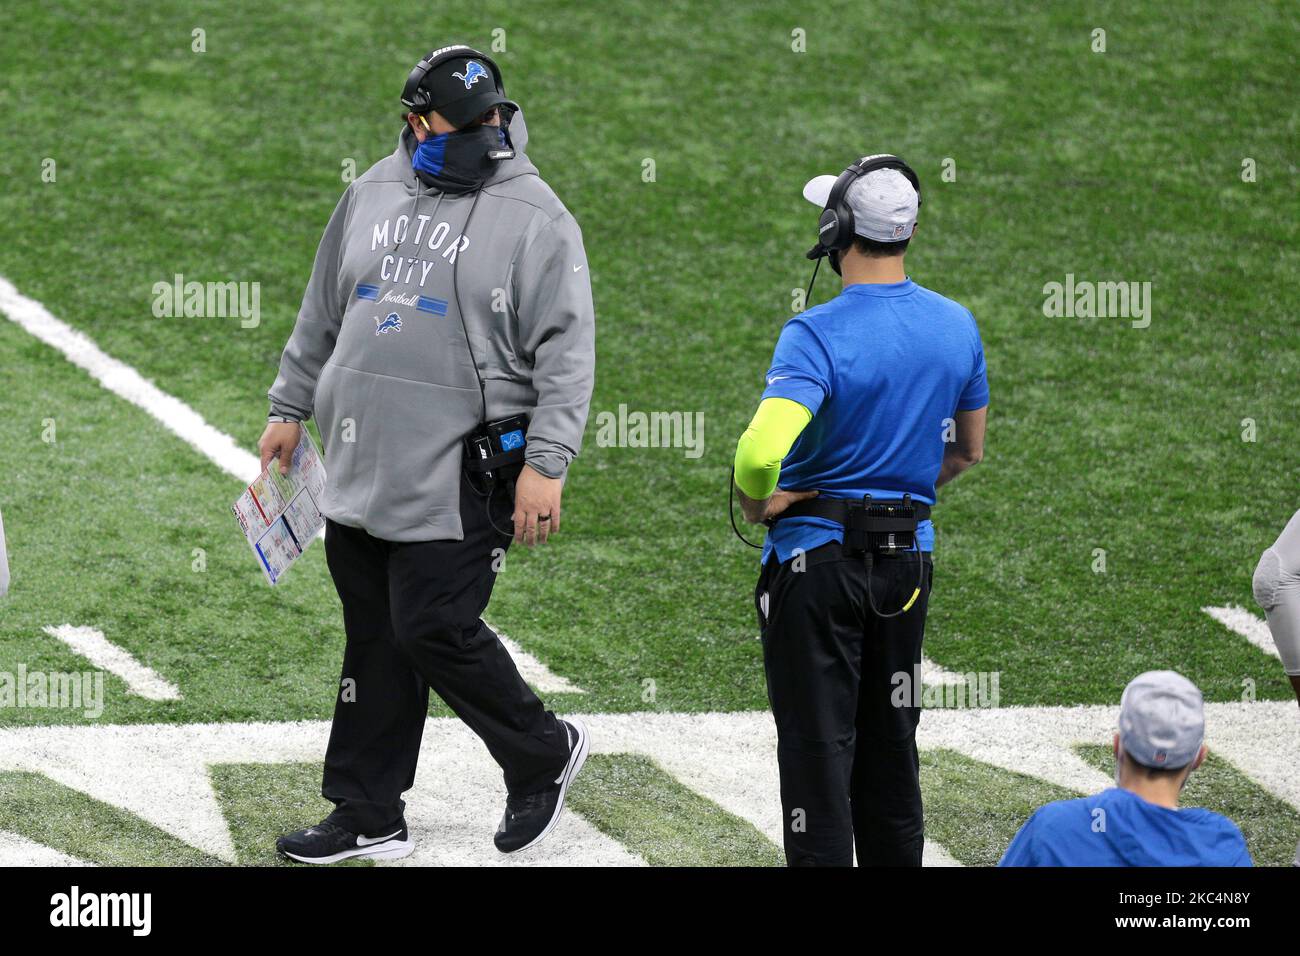 Detroit Lions head coach Matt Patricia is seen during the first half of an NFL football game against the Houston Texans in Detroit, Michigan USA, on Thursday, November 26, 2020. (Photo by Jorge Lemus/NurPhoto) Stock Photo